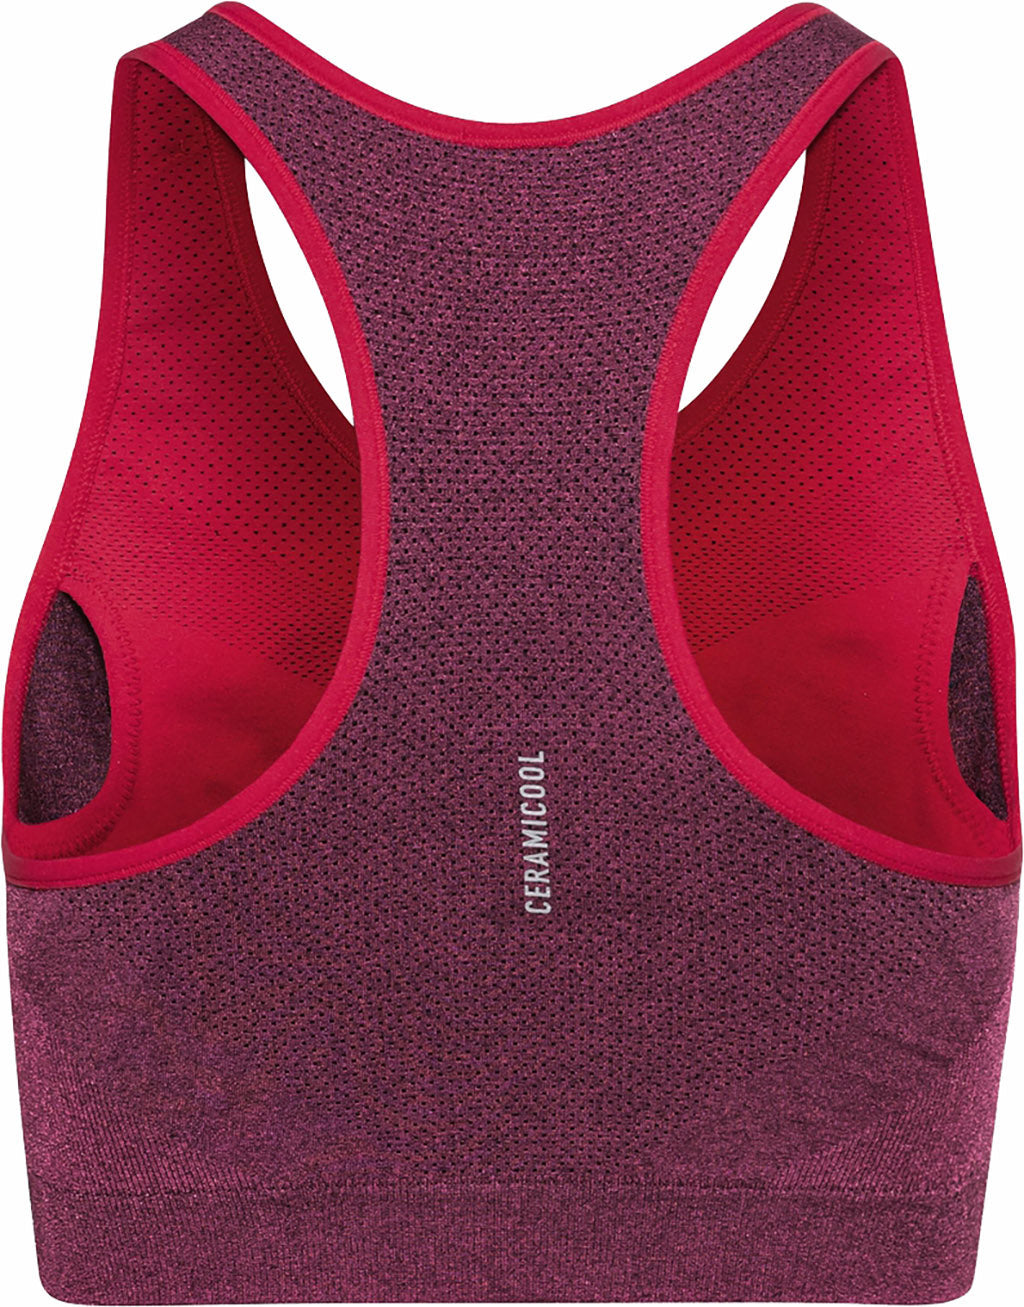 adidas TLRD Move Training High-Support Bra - Women's